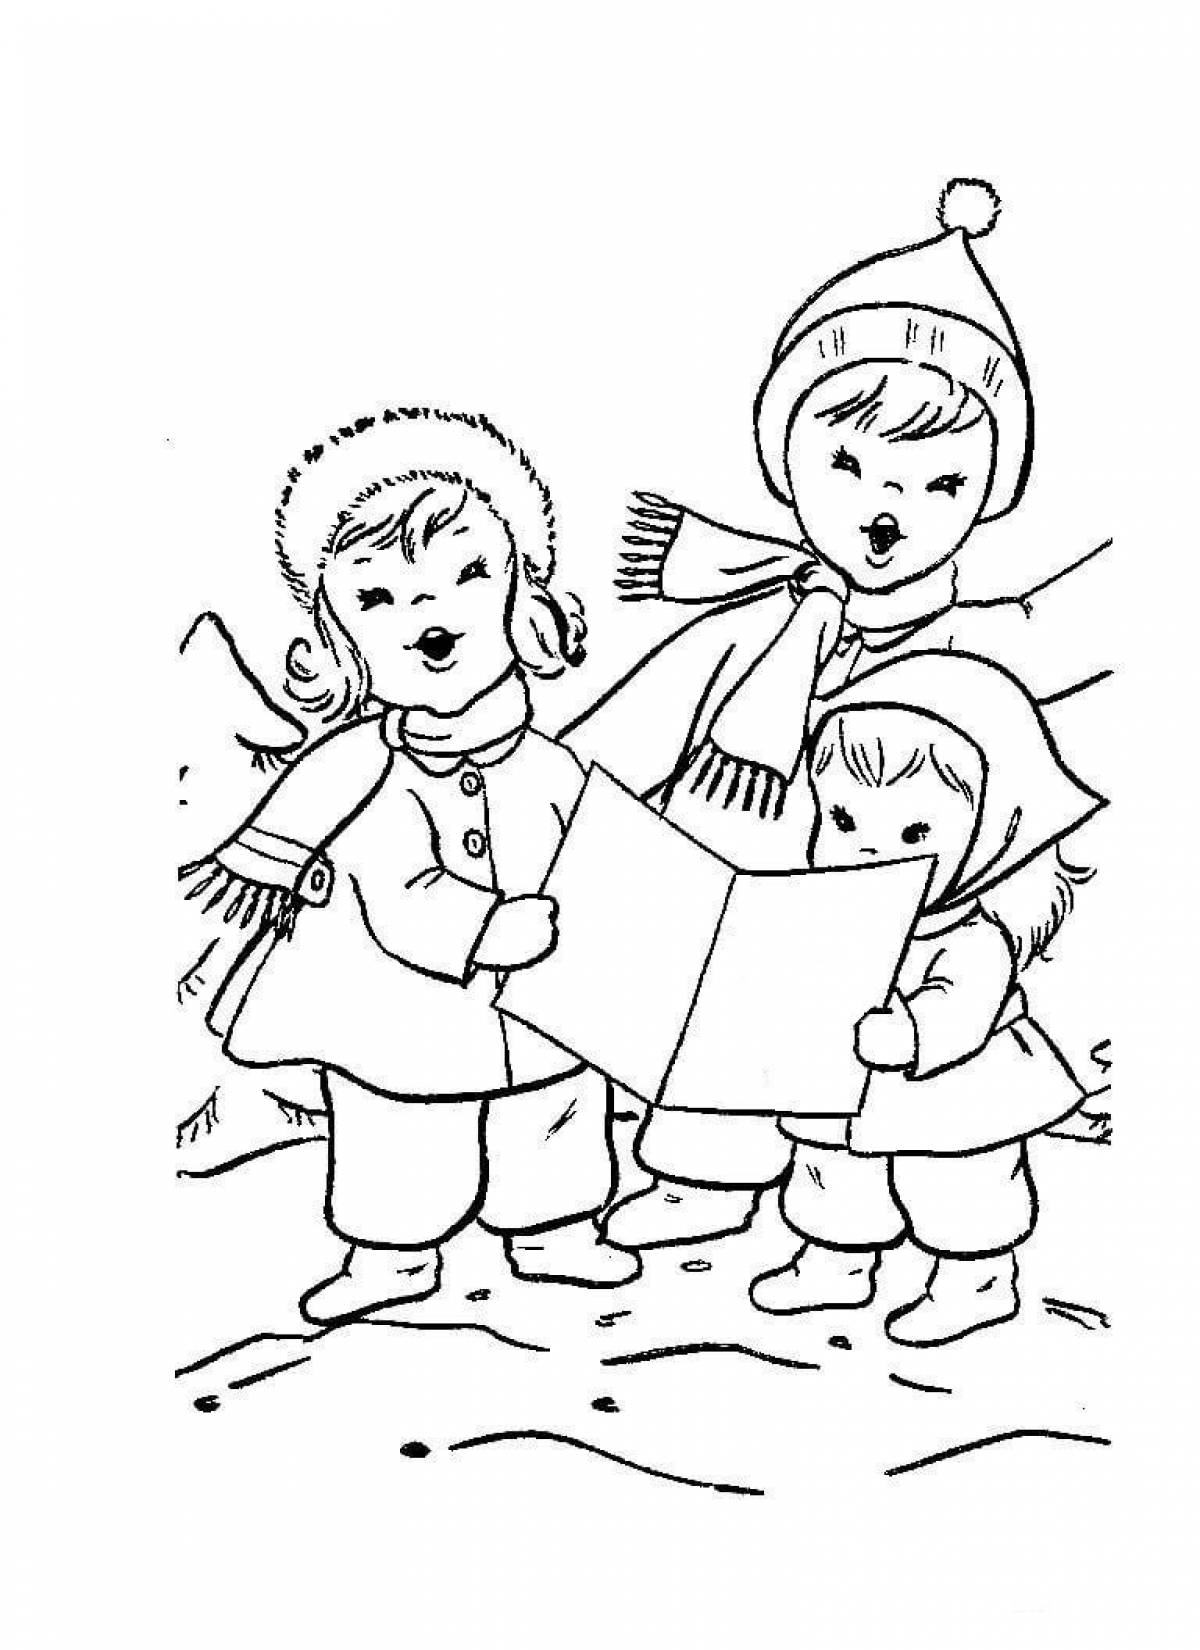 Color-zany carol coloring page for children 6-7 years old